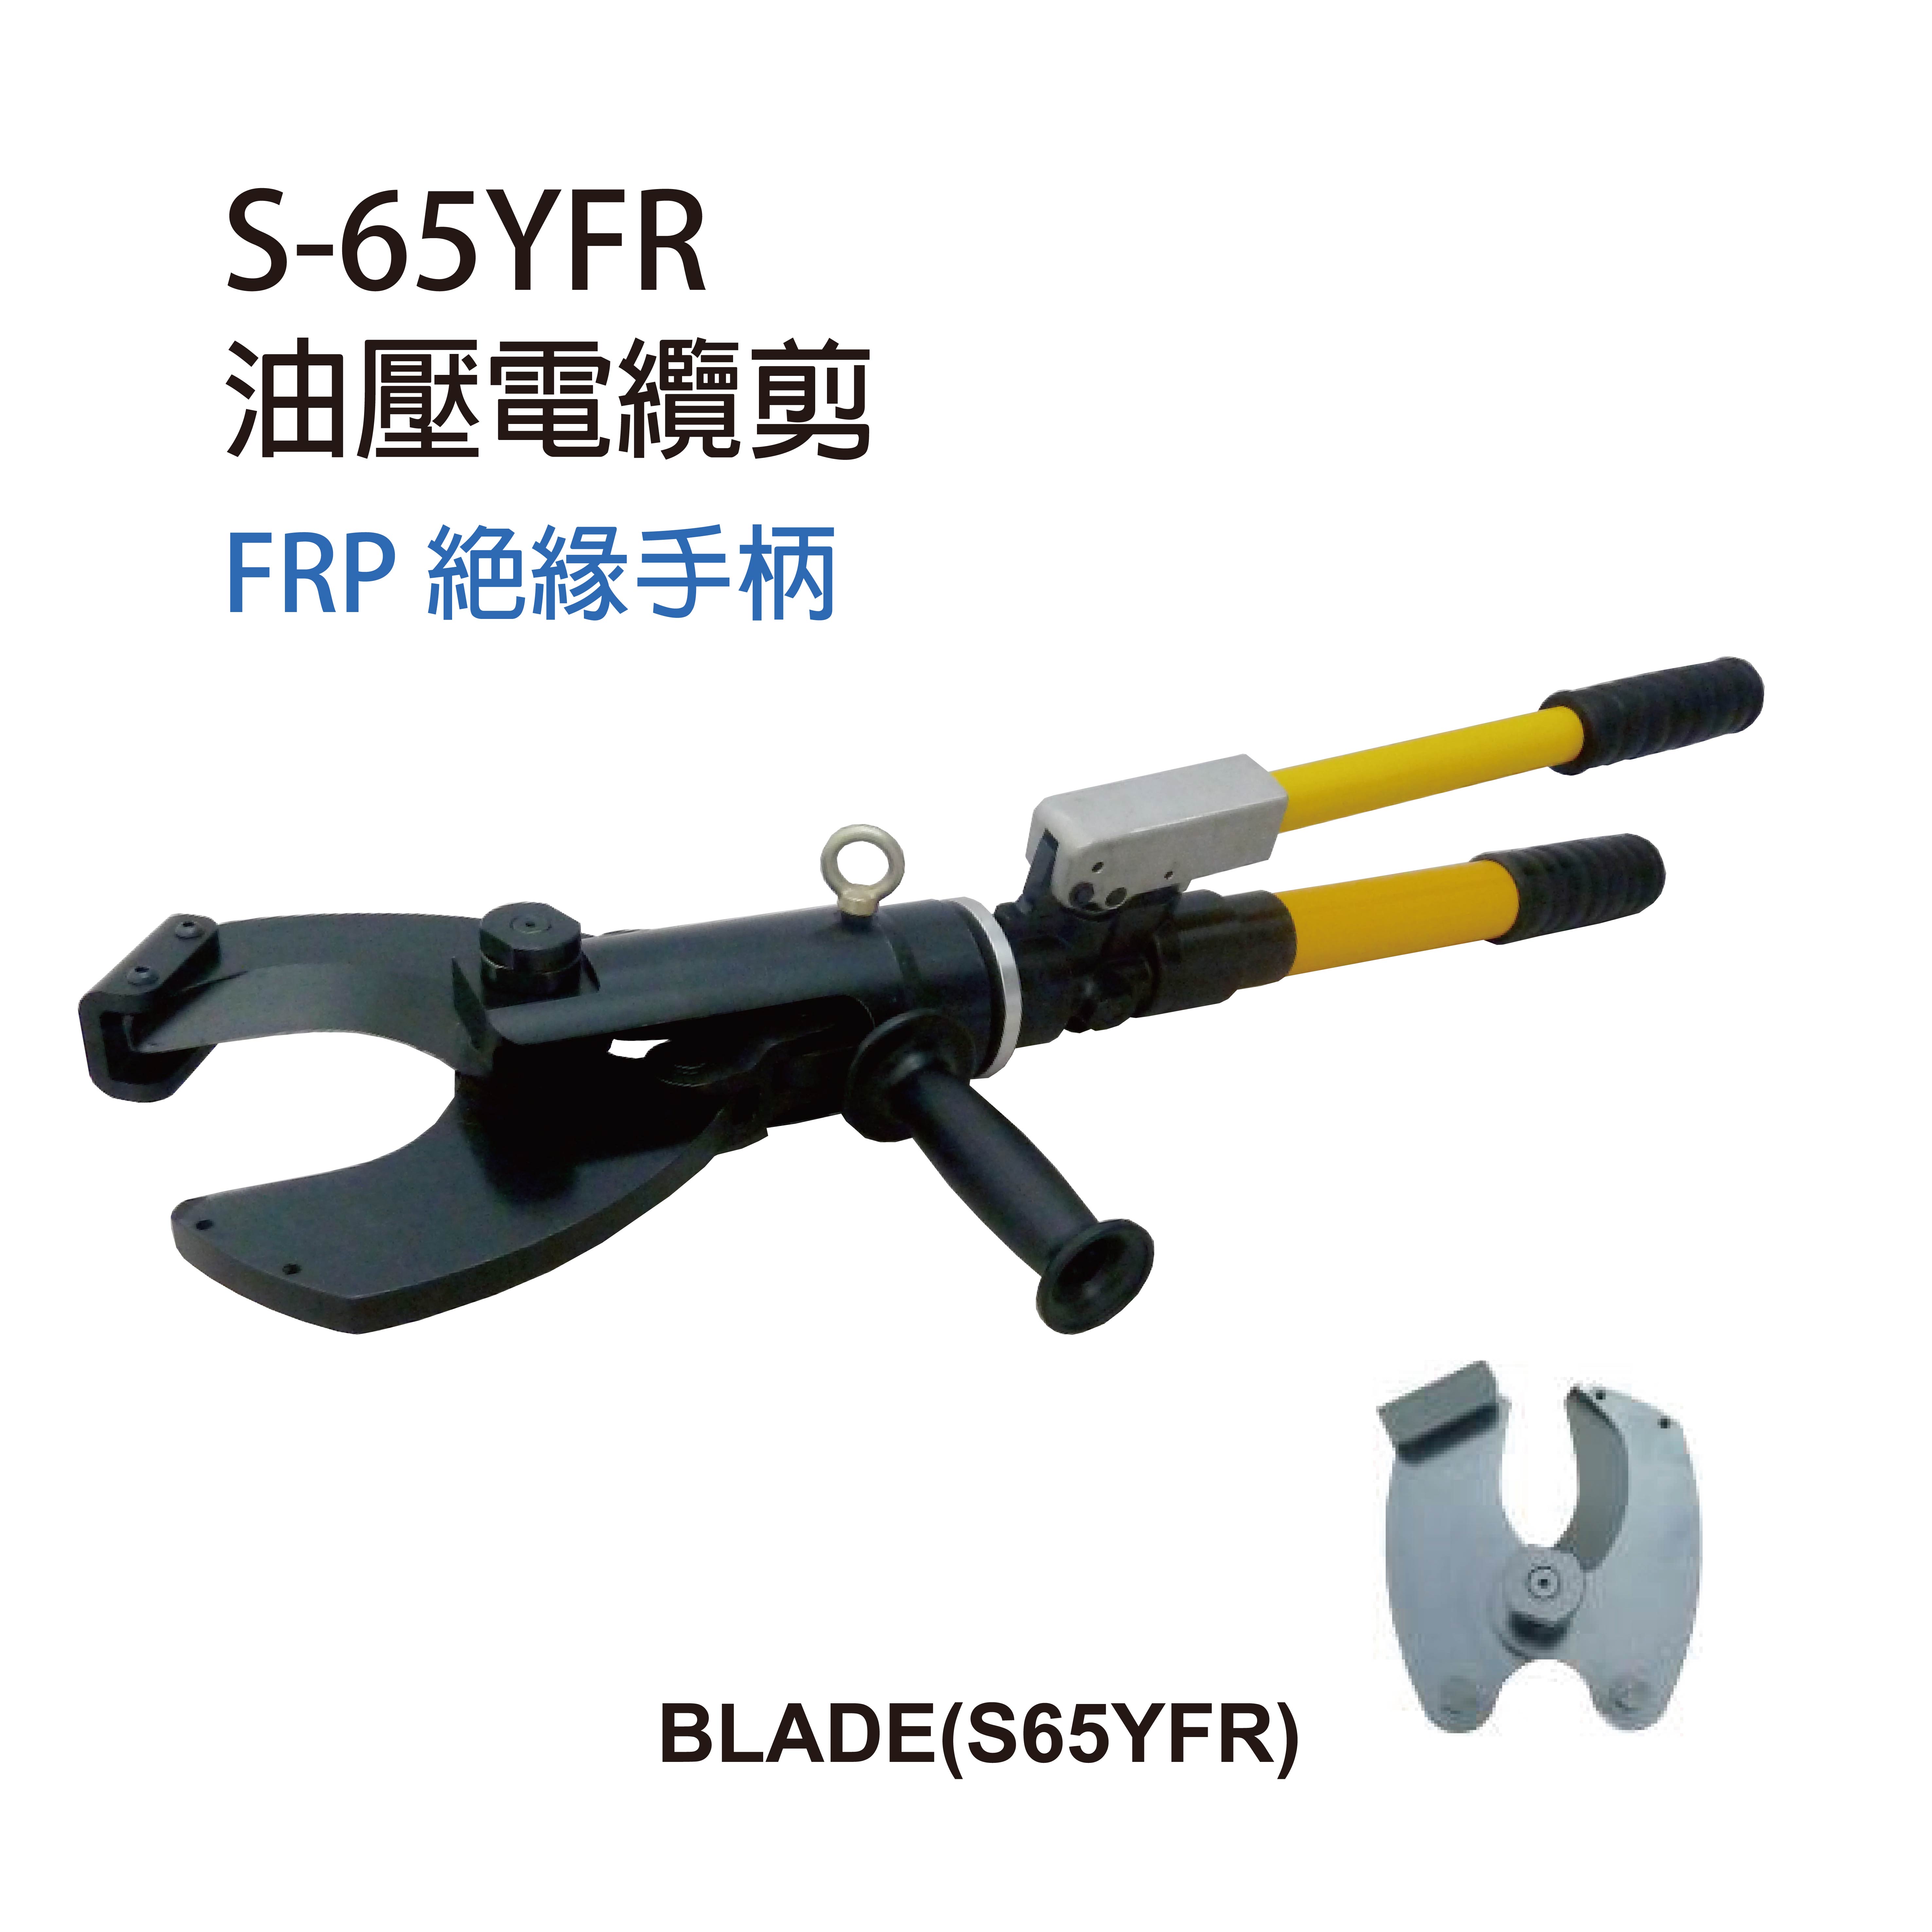 S-65YFR MANUAL HYDRAULIC CABLE CUTTERS